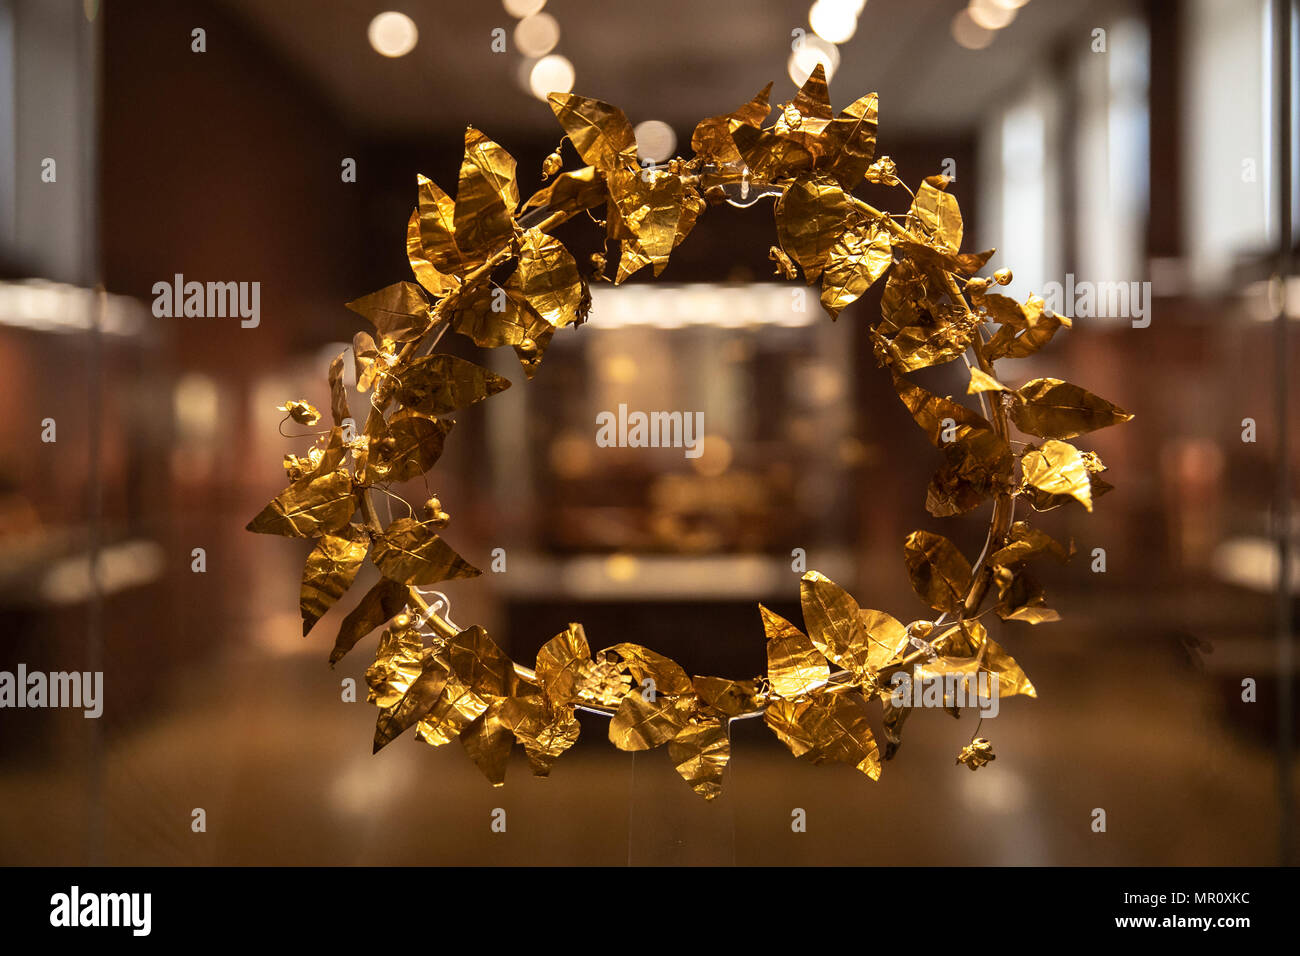 Athens. 23rd May, 2018. Picture taken on May 23, 2018 shows a gold leaf crown exhibited at the National Archaeological Museum in Athens, Greece. Located in the center of Athens, the National Archaeological Museum houses more than 20,000 exhibits, including the world's finest collection of Greek antiquities. Credit: Lefteris Partsalis/Xinhua/Alamy Live News Stock Photo